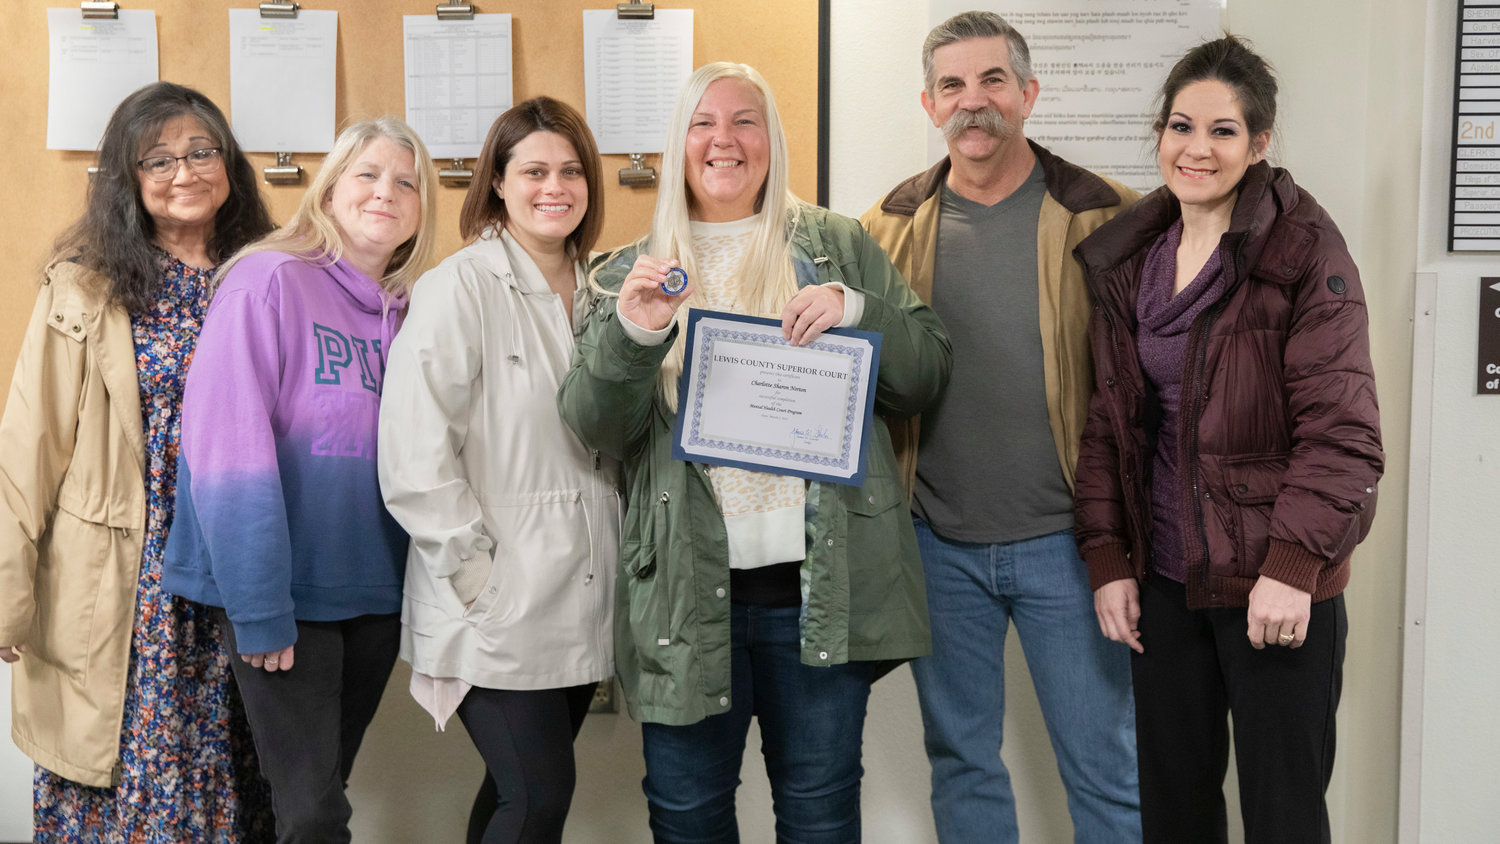 Charlotte Sharon Norton smiles for a photo with supporters after successfully completing the Mental Health Court Program on Thursday in Lewis County Superior Court.